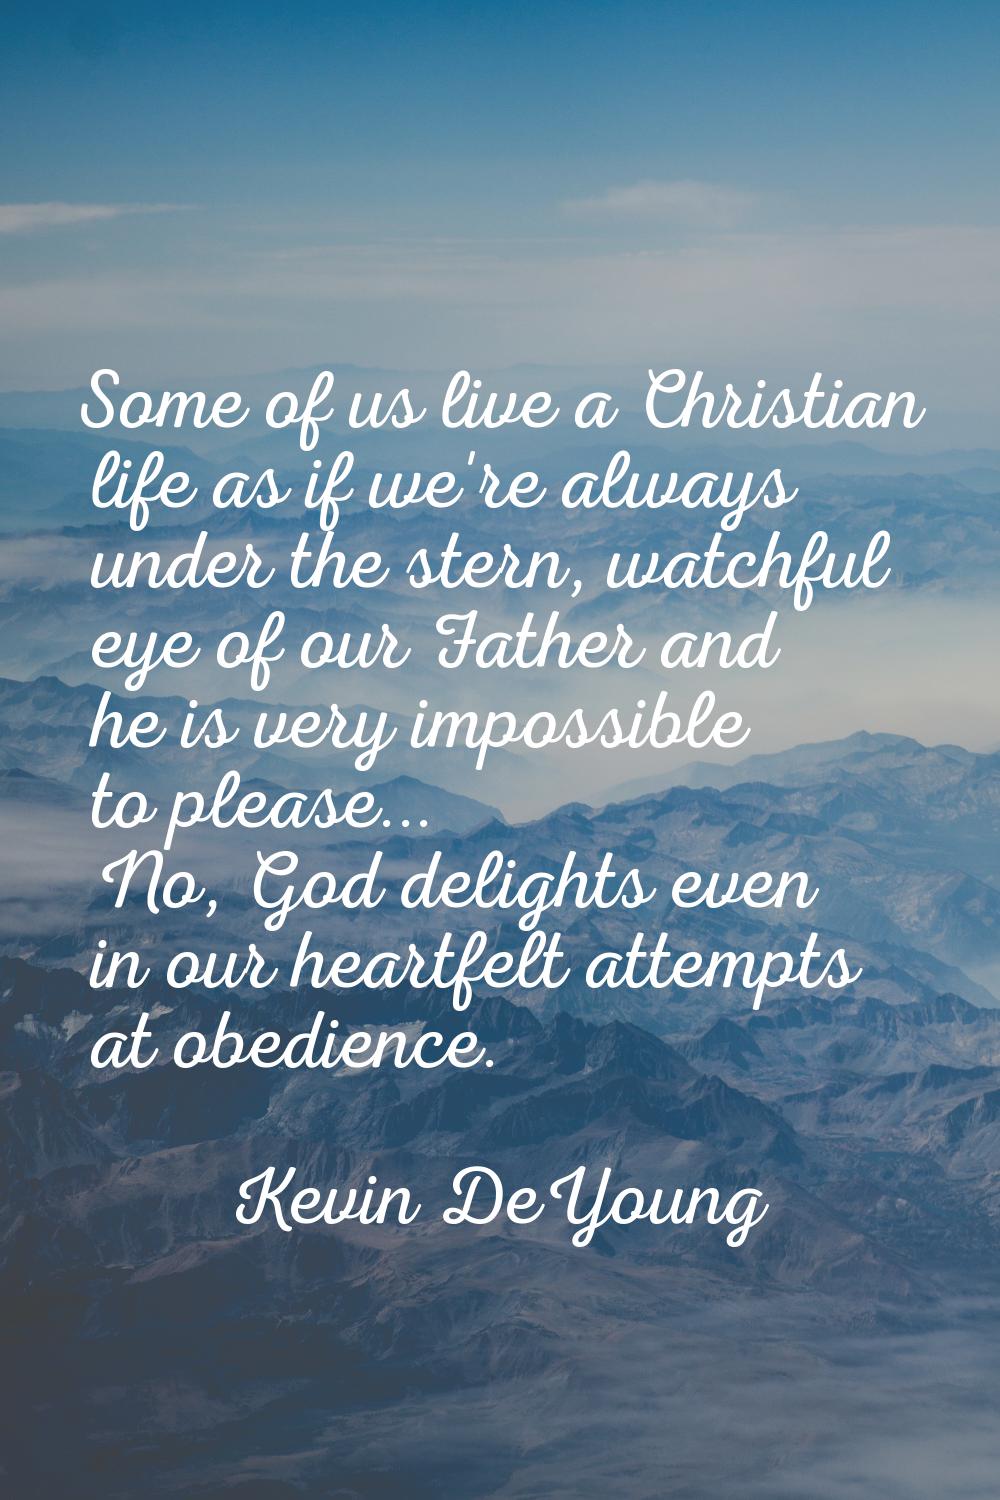 Some of us live a Christian life as if we're always under the stern, watchful eye of our Father and